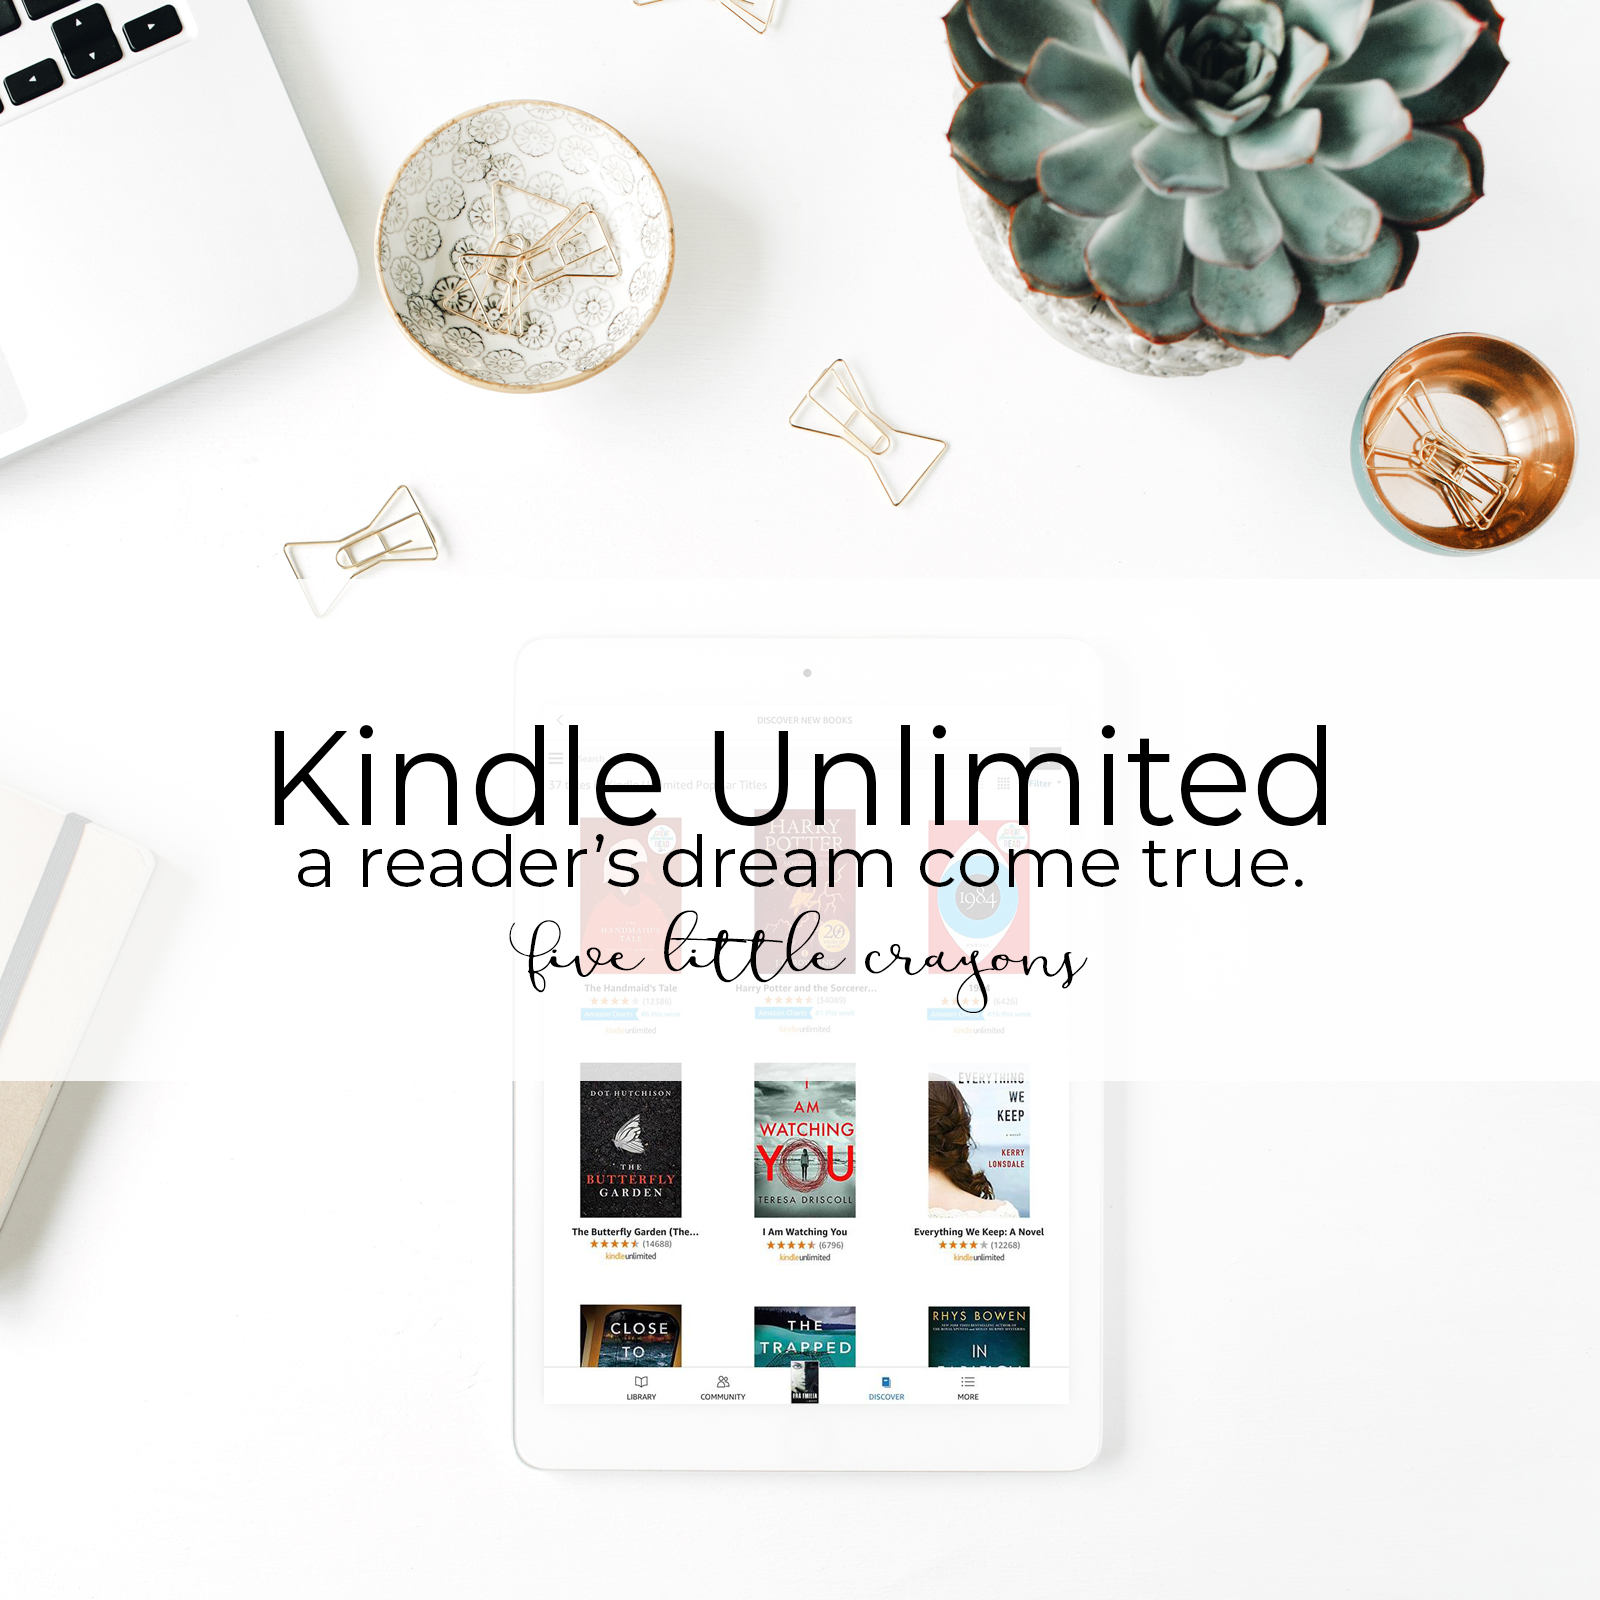 Kindle Unlimited – A Reader’s Dream Come True